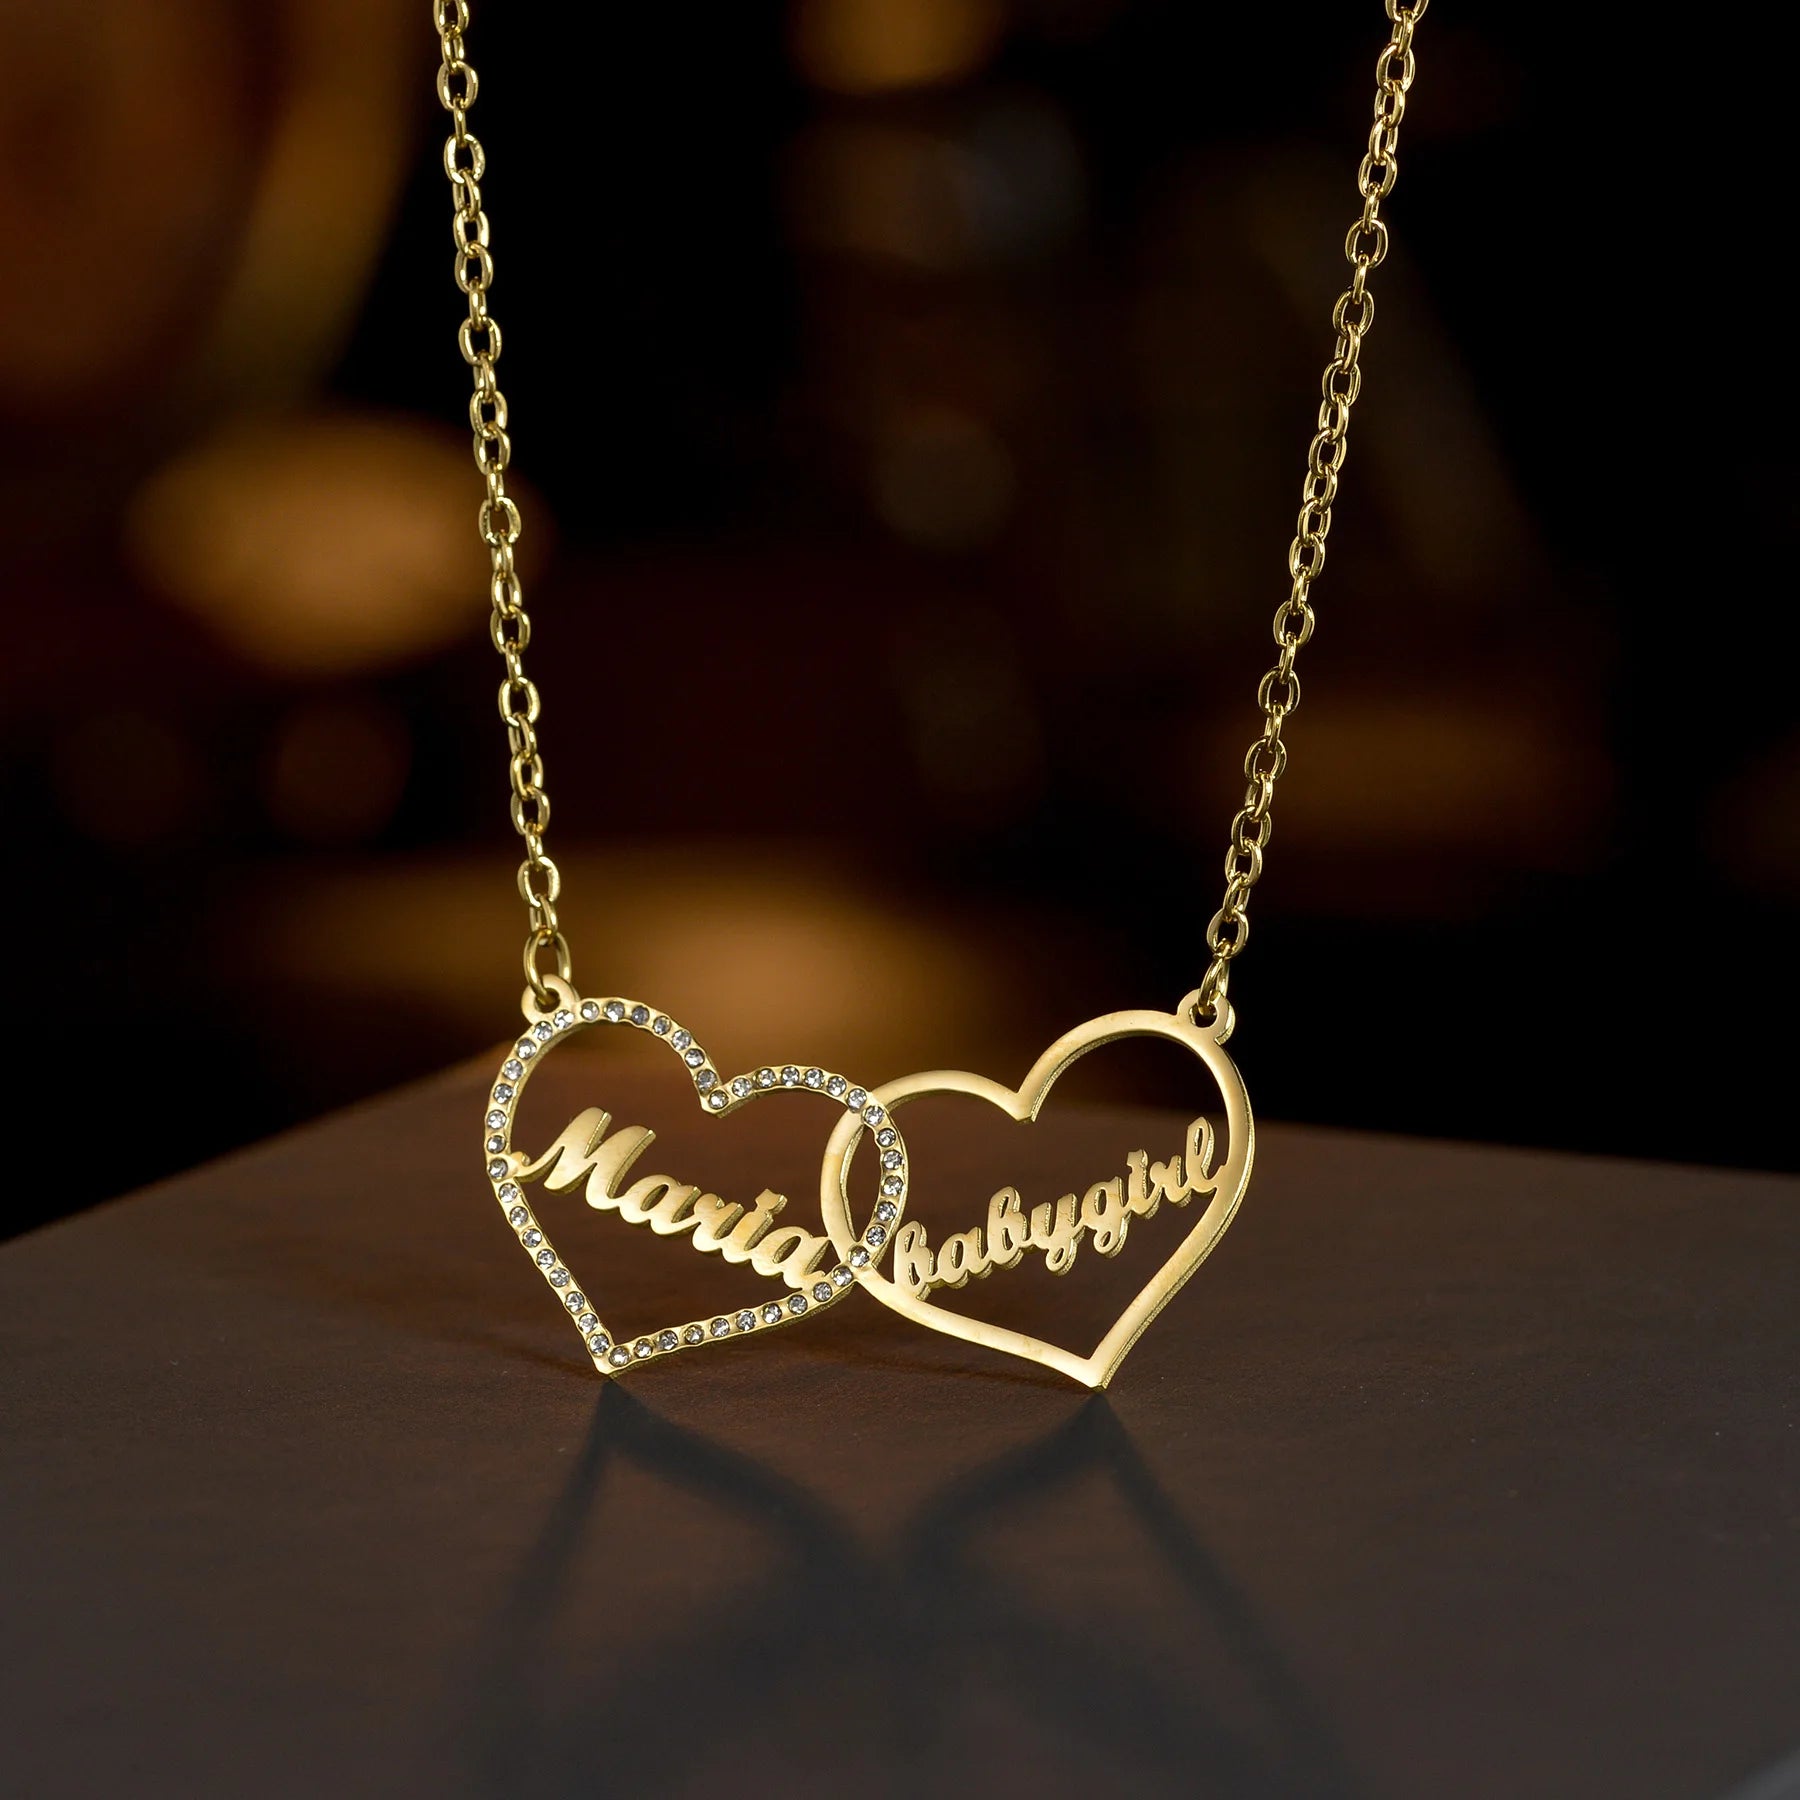 Exquisite Elegant 18K Gold Plated Personalized 2 Names tone Heart Pendant Necklace